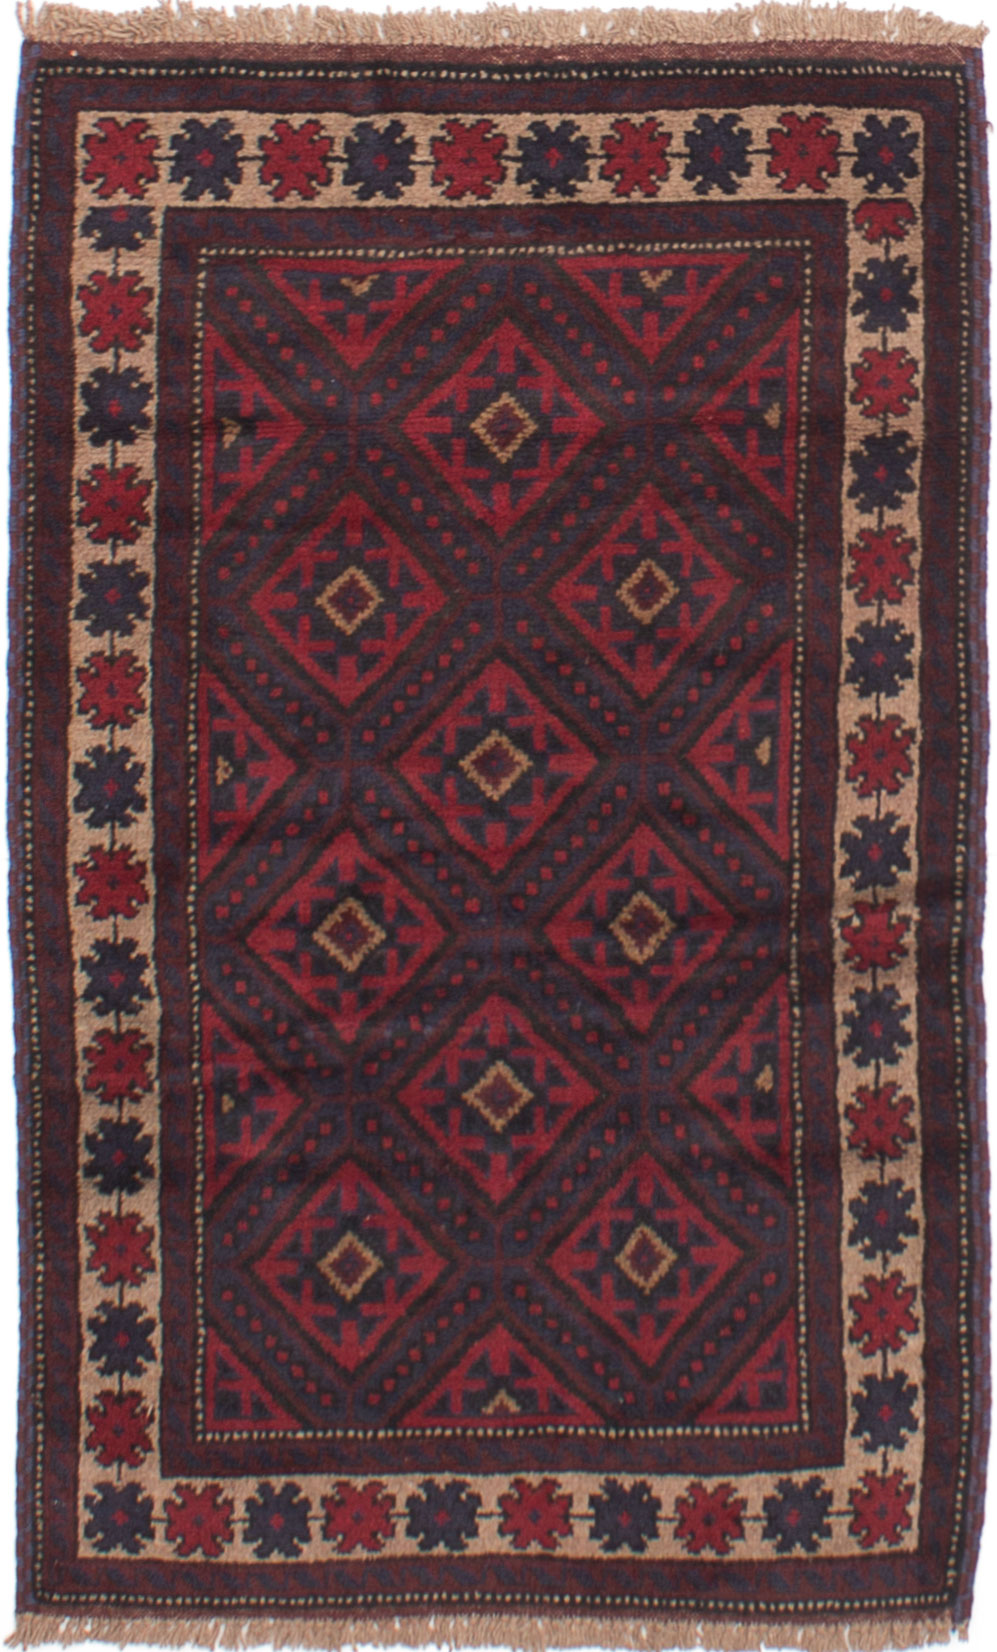 Hand-knotted Finest Rizbaft Dark Red Wool Rug 2'11" x 4'10"  Size: 2'11" x 4'10"  